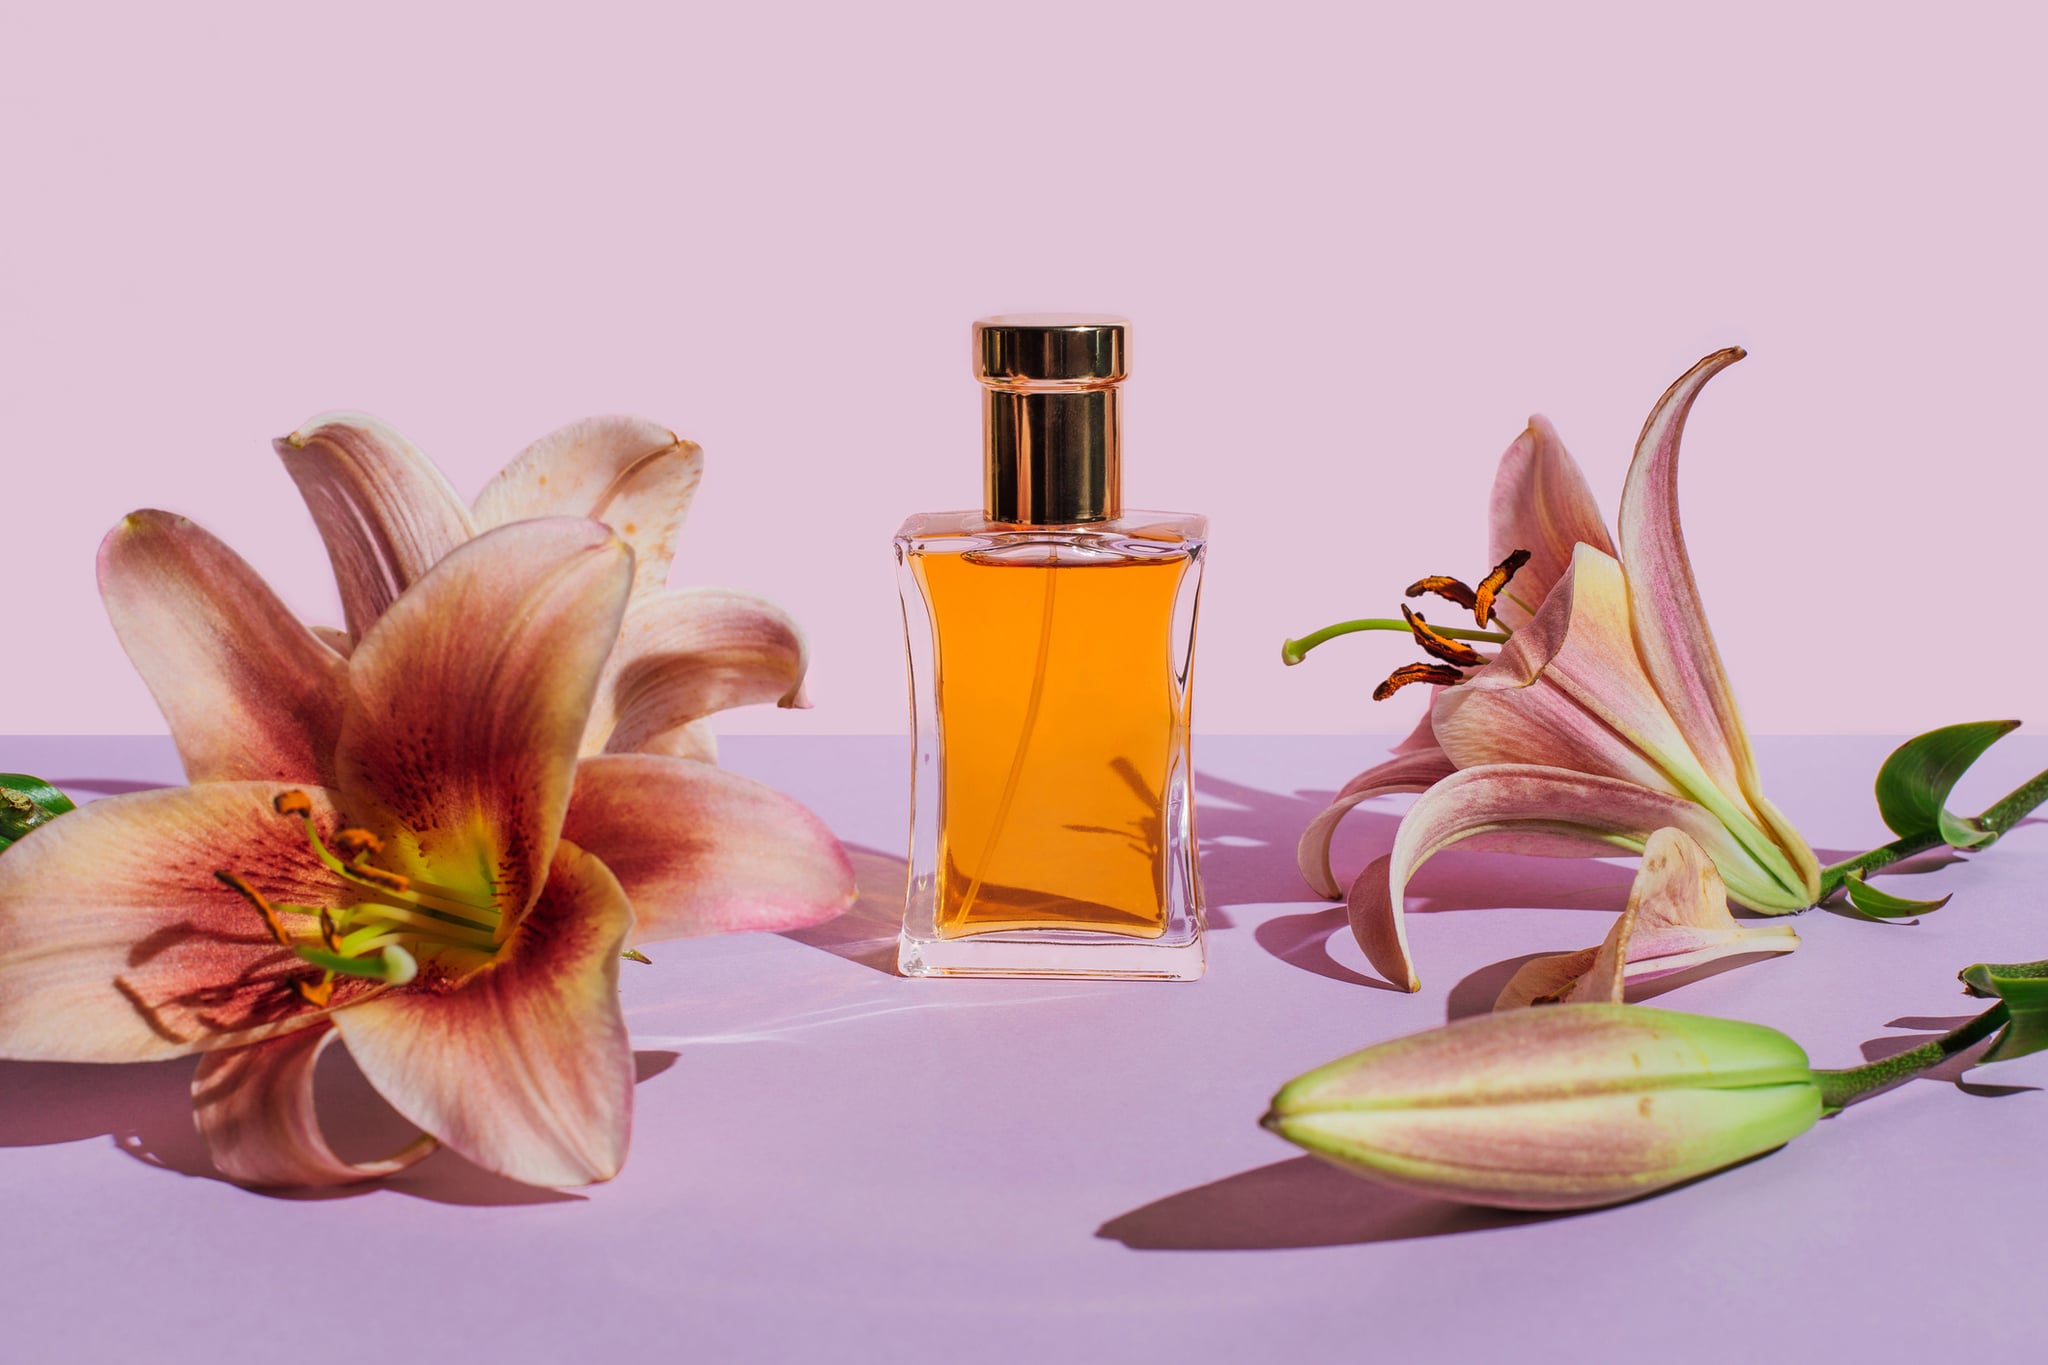 Bottle of perfume with lily flowers on purple background. Beauty products for body and face care. Minimal style perfumery template